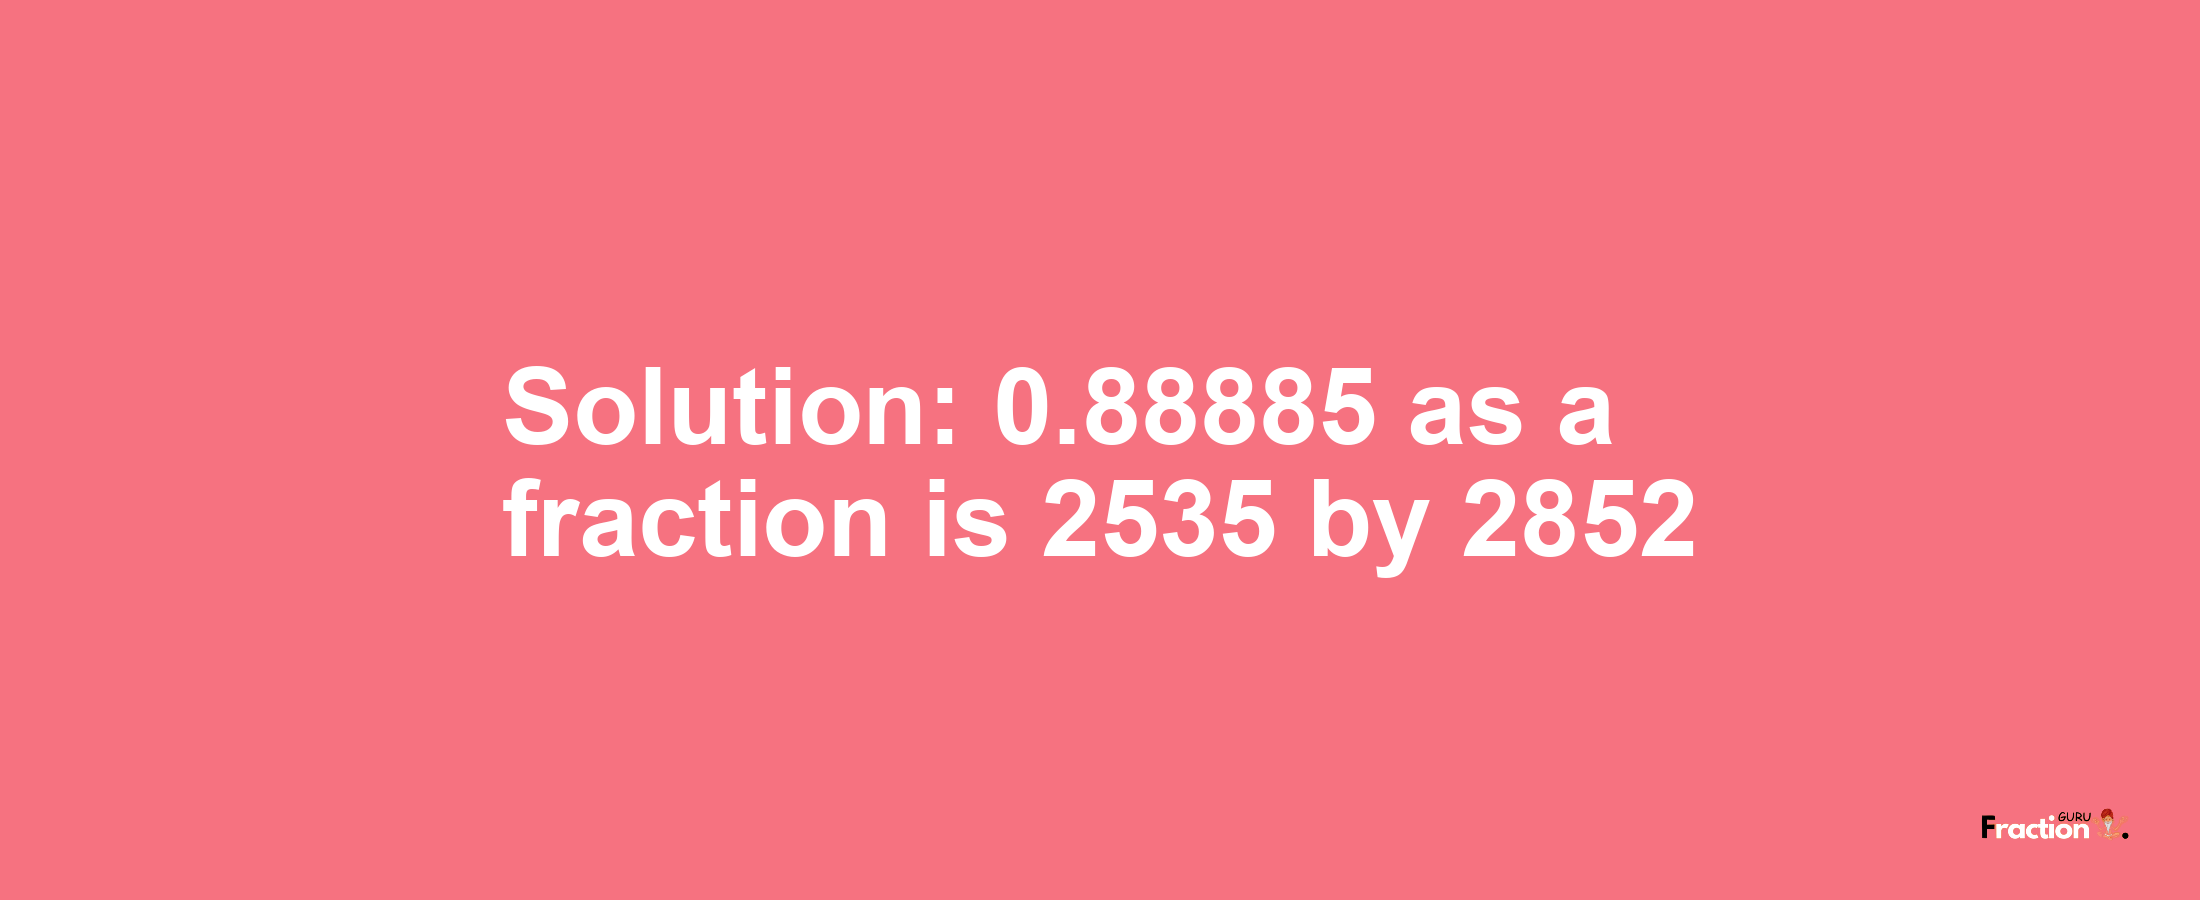 Solution:0.88885 as a fraction is 2535/2852